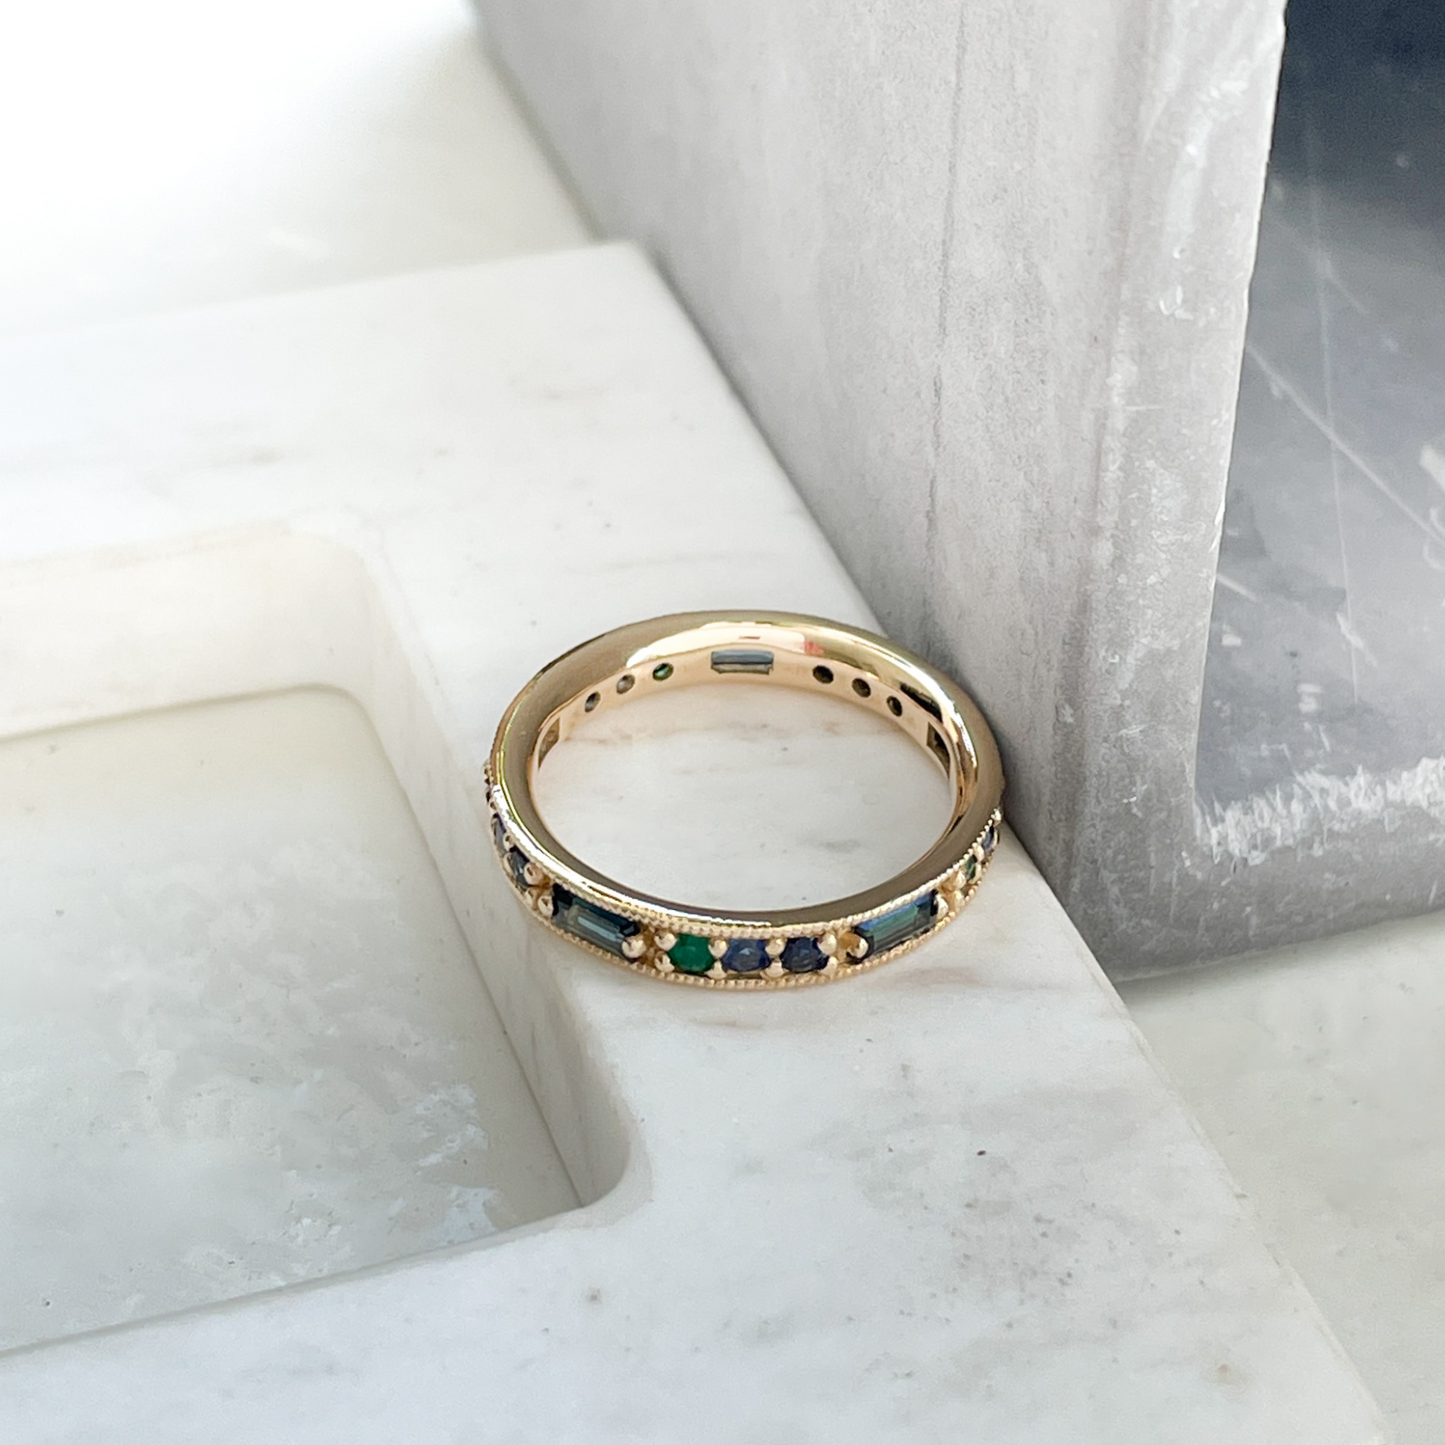 OctaHedron Jewelry Presidio Round Brilliant Cut Brazilian Emeralds, Royal, and Dark Blue Sapphires with Australian Teal Baguette Sapphire Sapphire Eternity Band Ring in 14k Yellow Gold